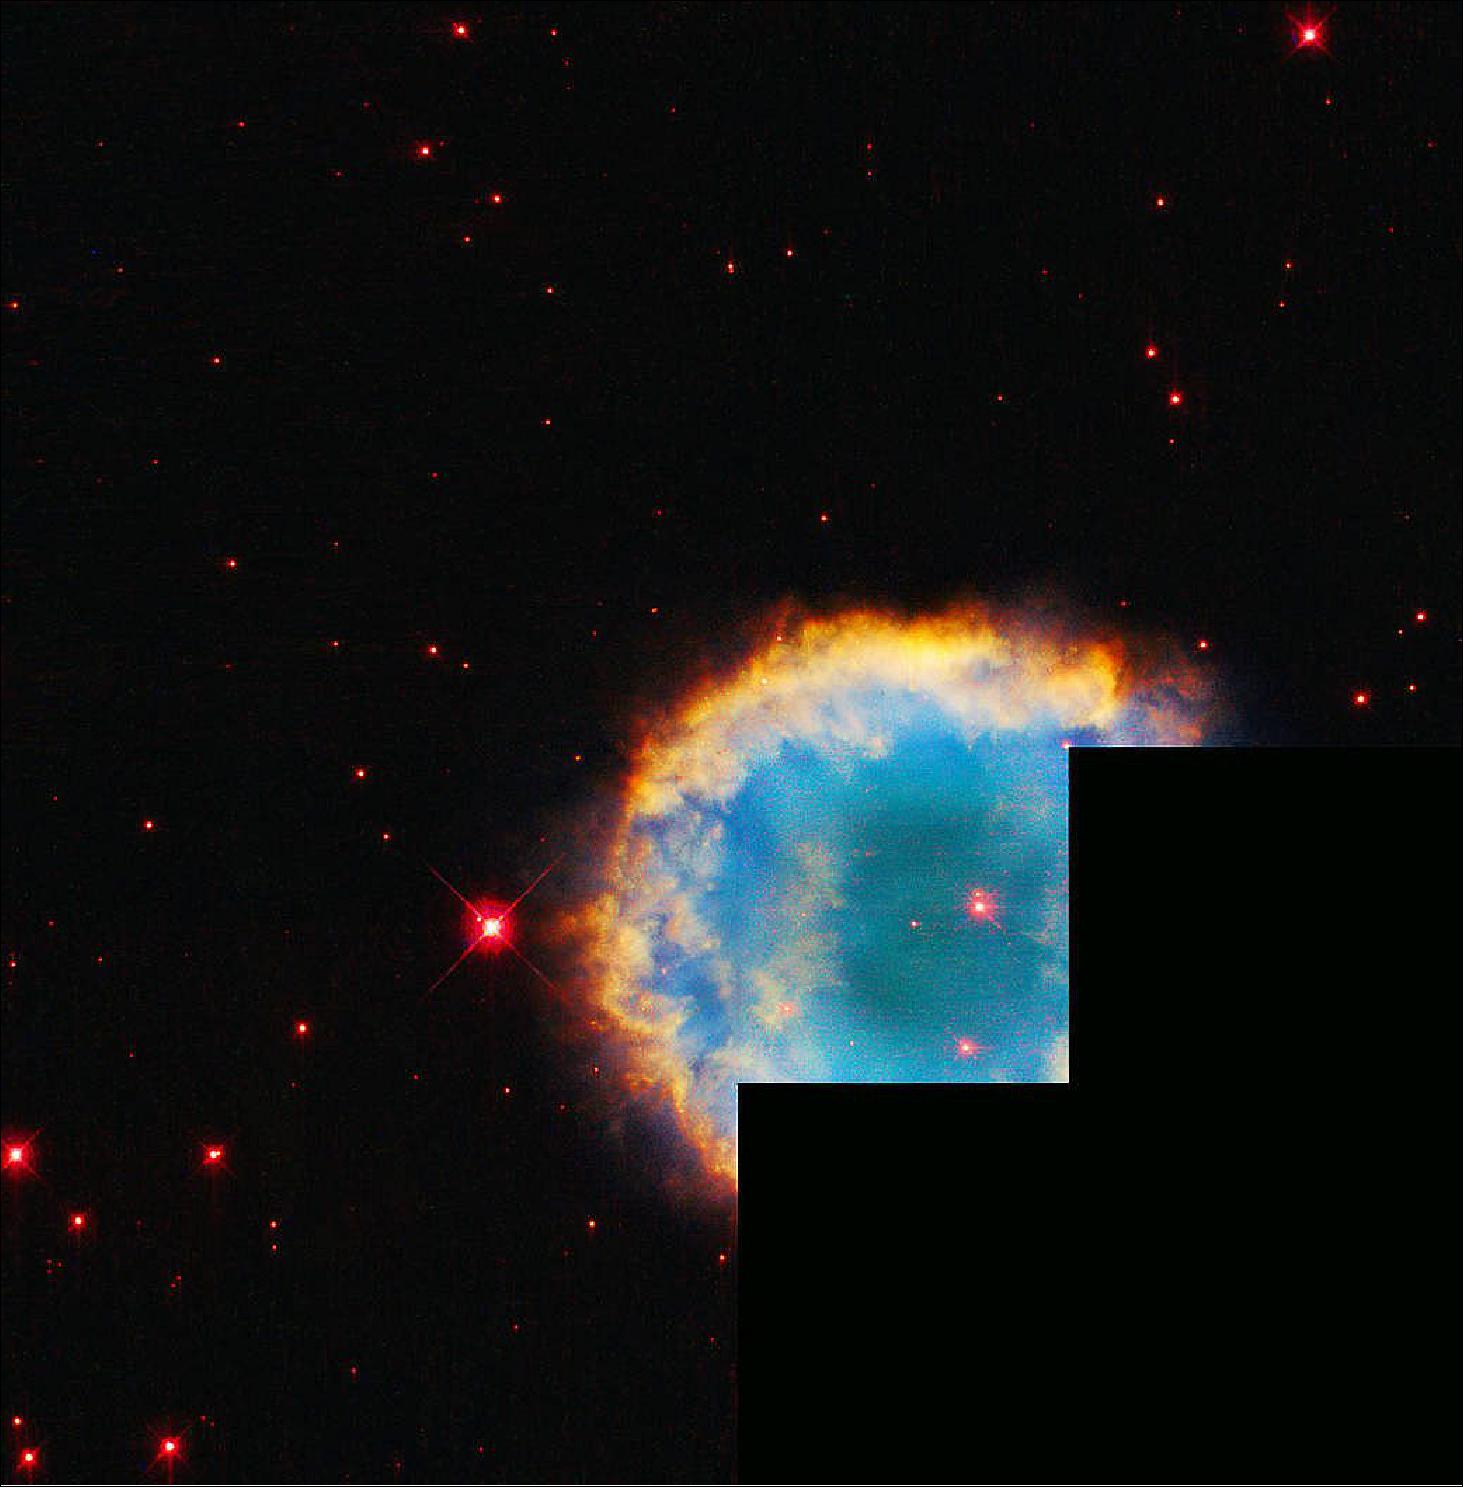 Figure 30: In this color-filled image, blue represents oxygen (O III), green is hydrogen (H-alpha), orange is nitrogen (N II), and red is sulfur (S II). This Hubble Space Telescope image was captured by Hubble’s Wide Field and Planetary Camera 2, which gave it its distinctive stair-shape. One of the camera’s four detectors provided a magnified view, which would be shrunk down in the final image to match the other three, creating the unique shape [image credit: NASA, ESA, K. Knoll (NASA Goddard), and S. Öttl (Leopold Franzens Universität Innsbruck), et. al.; Processing: Gladys Kober (NASA/Catholic University of America)]